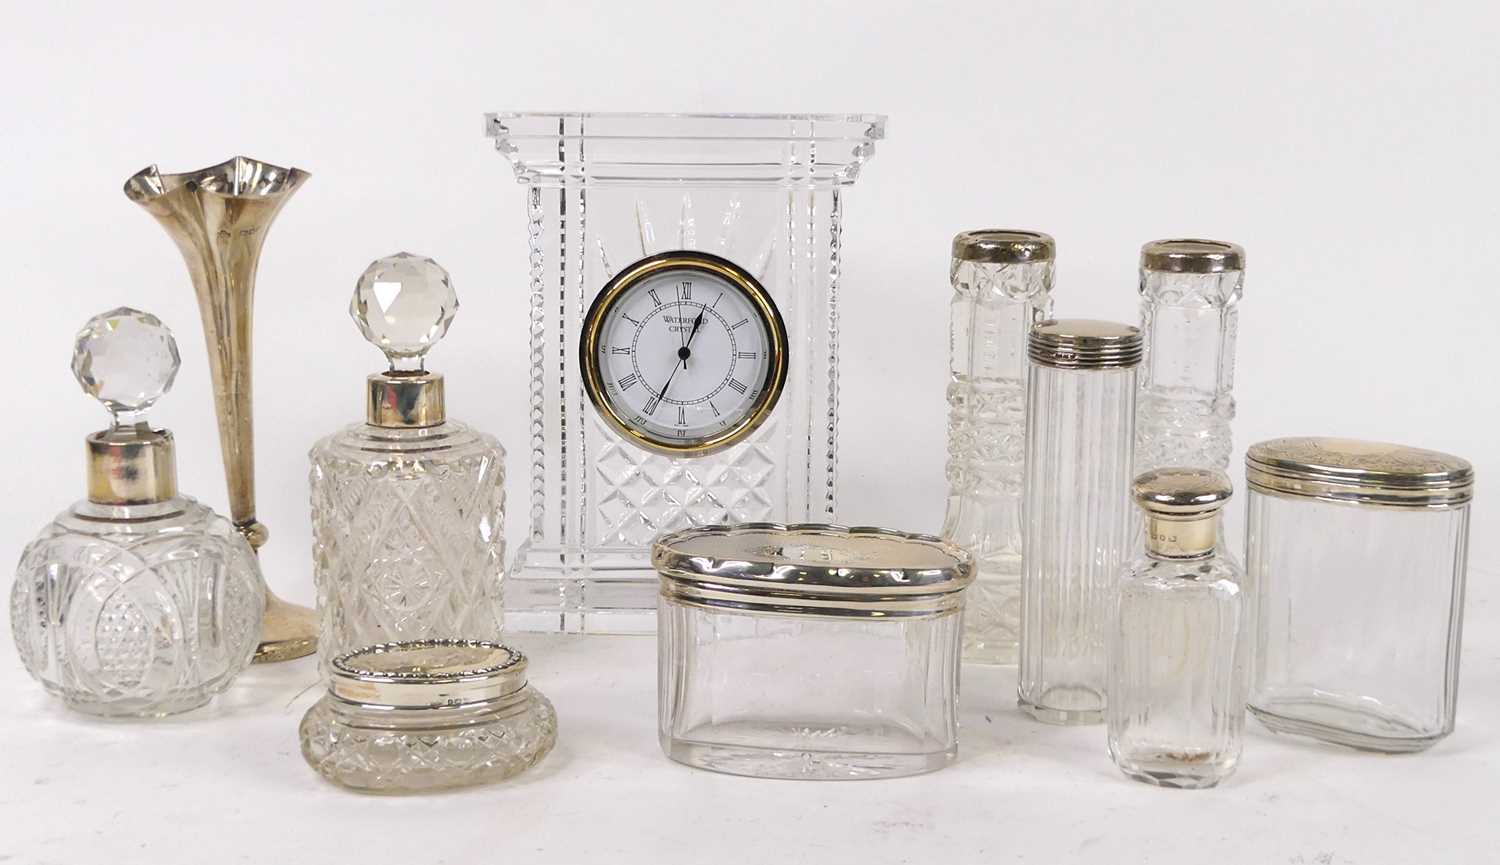 A Waterford Crystal mantel clock having quartz movement, height 18cm, together with various glass